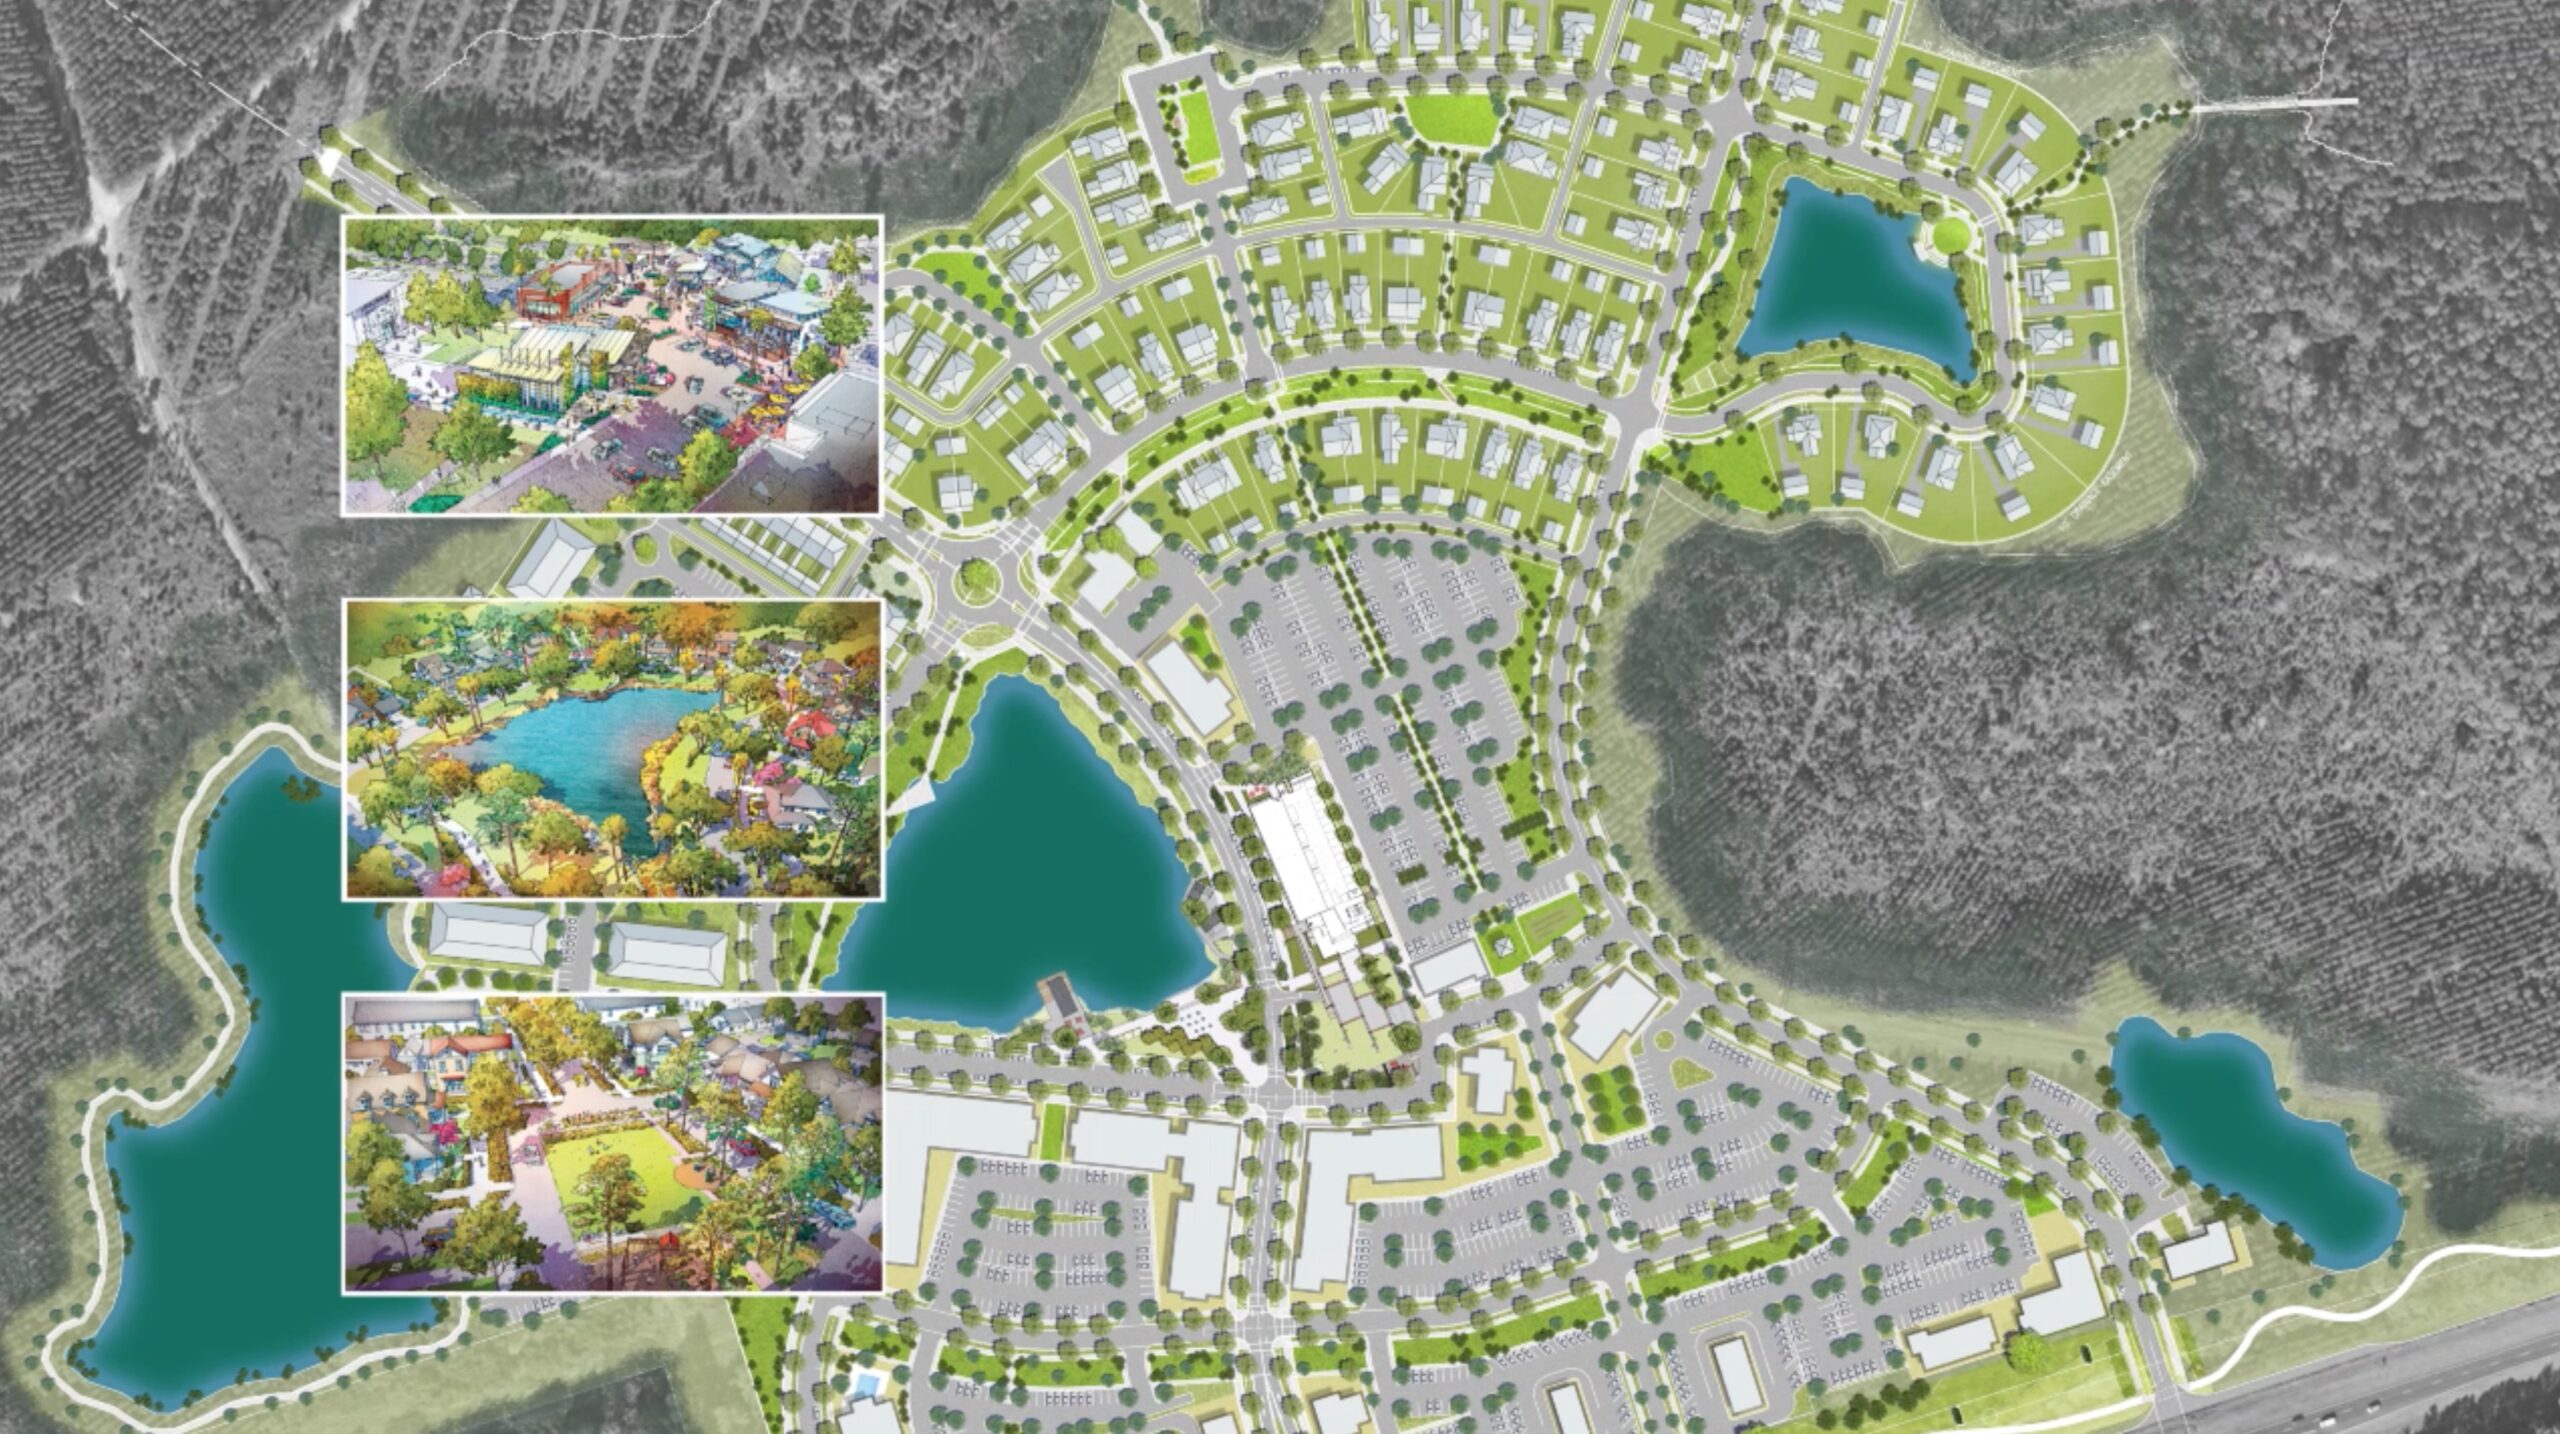 An aerial view of a plan for a residential development.